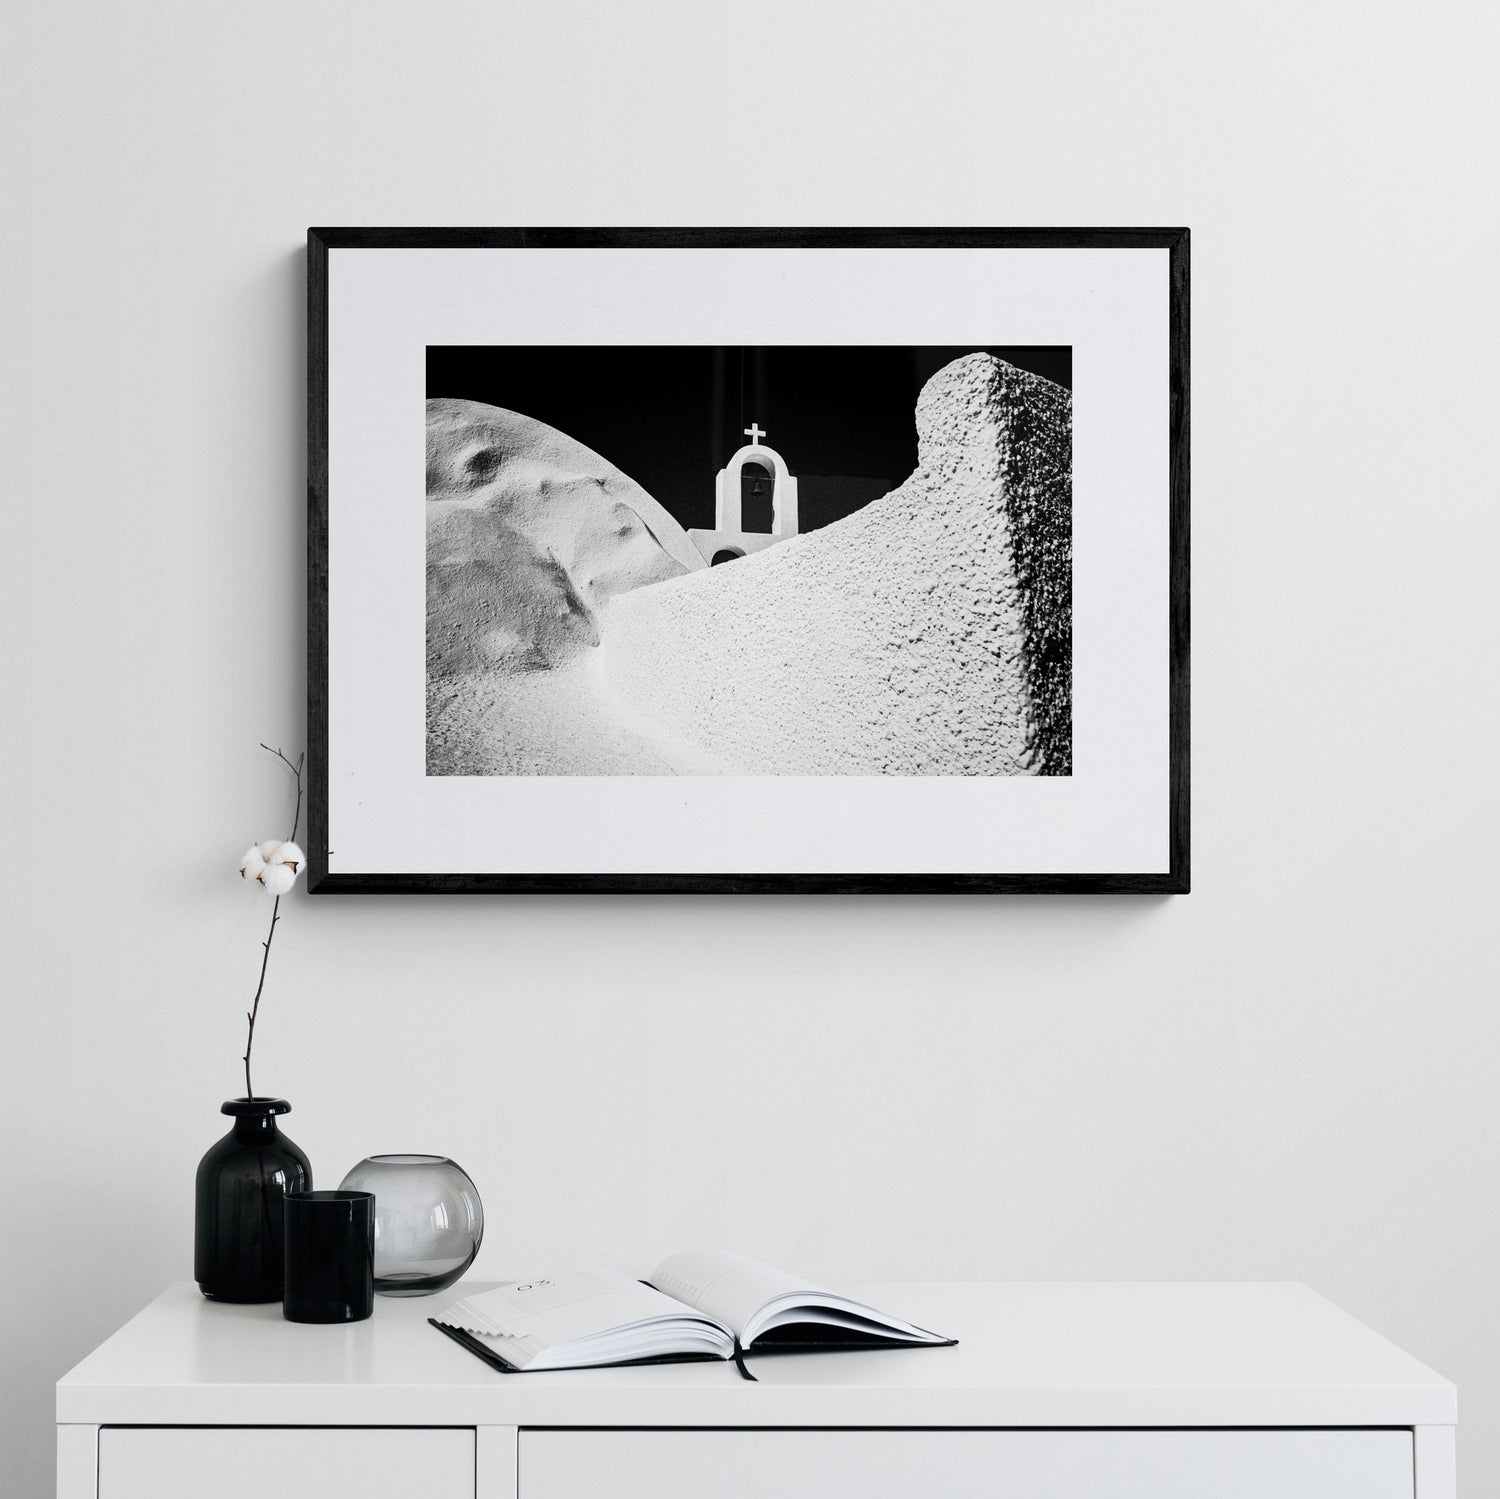 Black and white art wall photography by George Tatakis